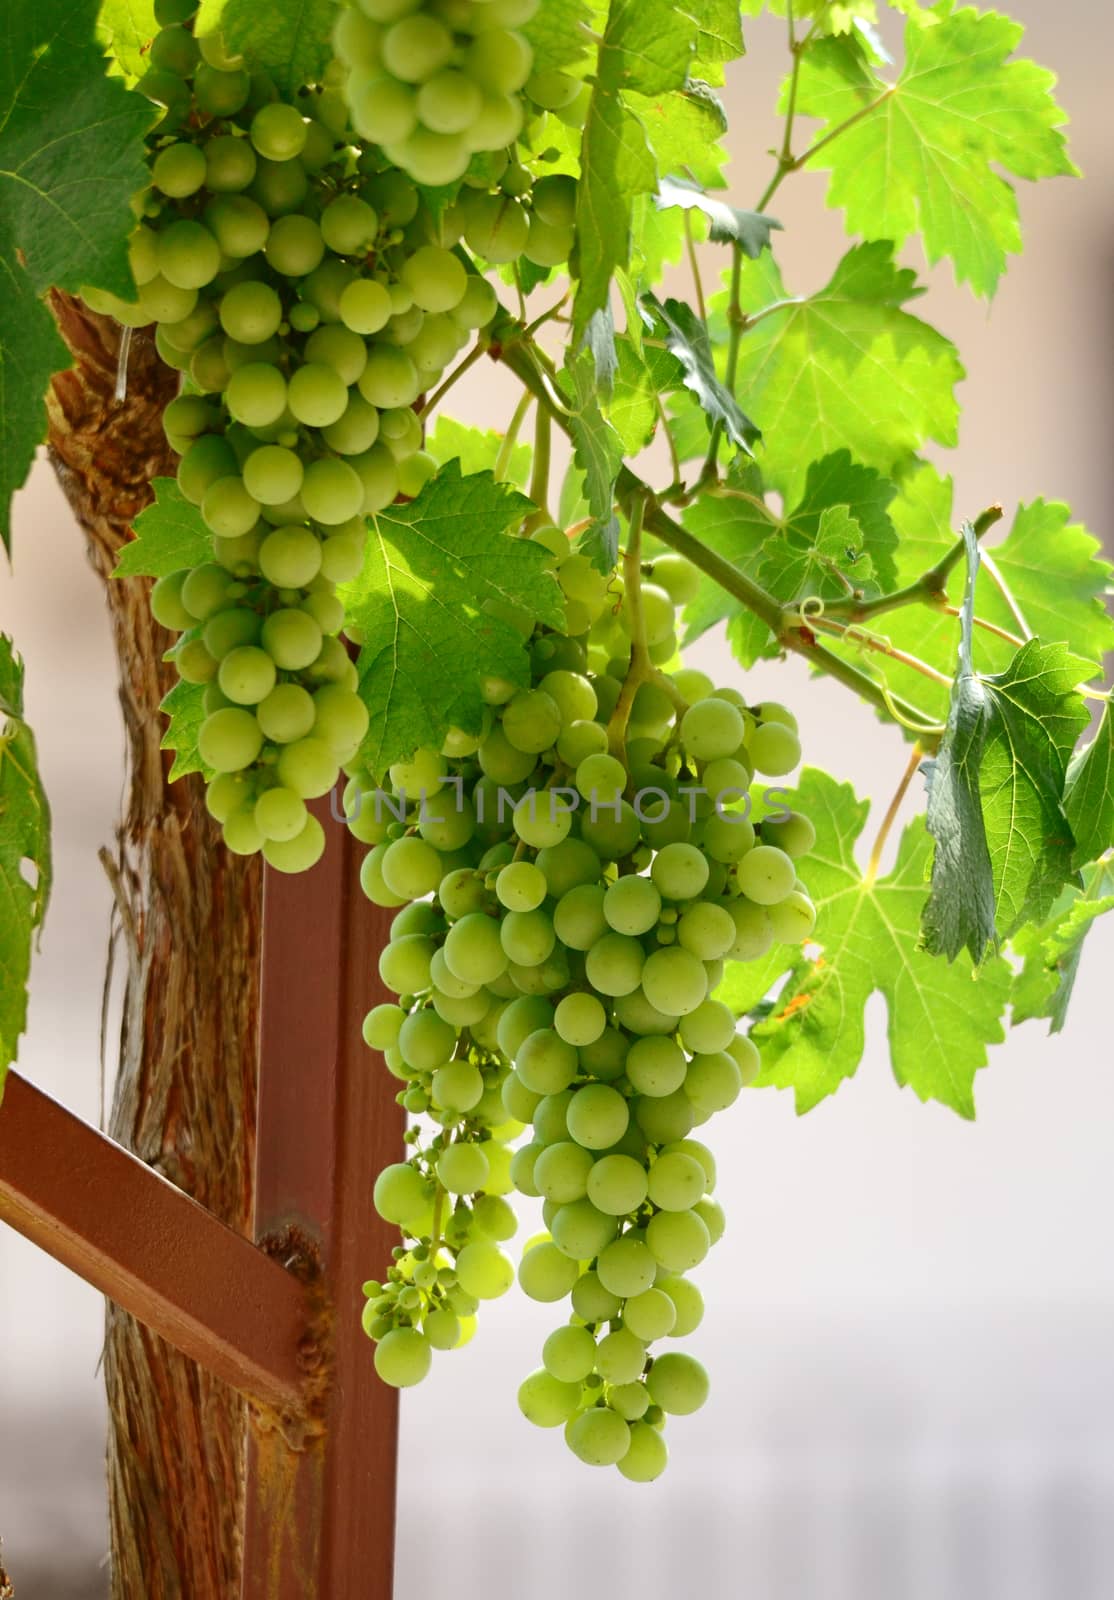 Picture of an unripe  grapes  with the sunlight beautifully shining through the vine leaves